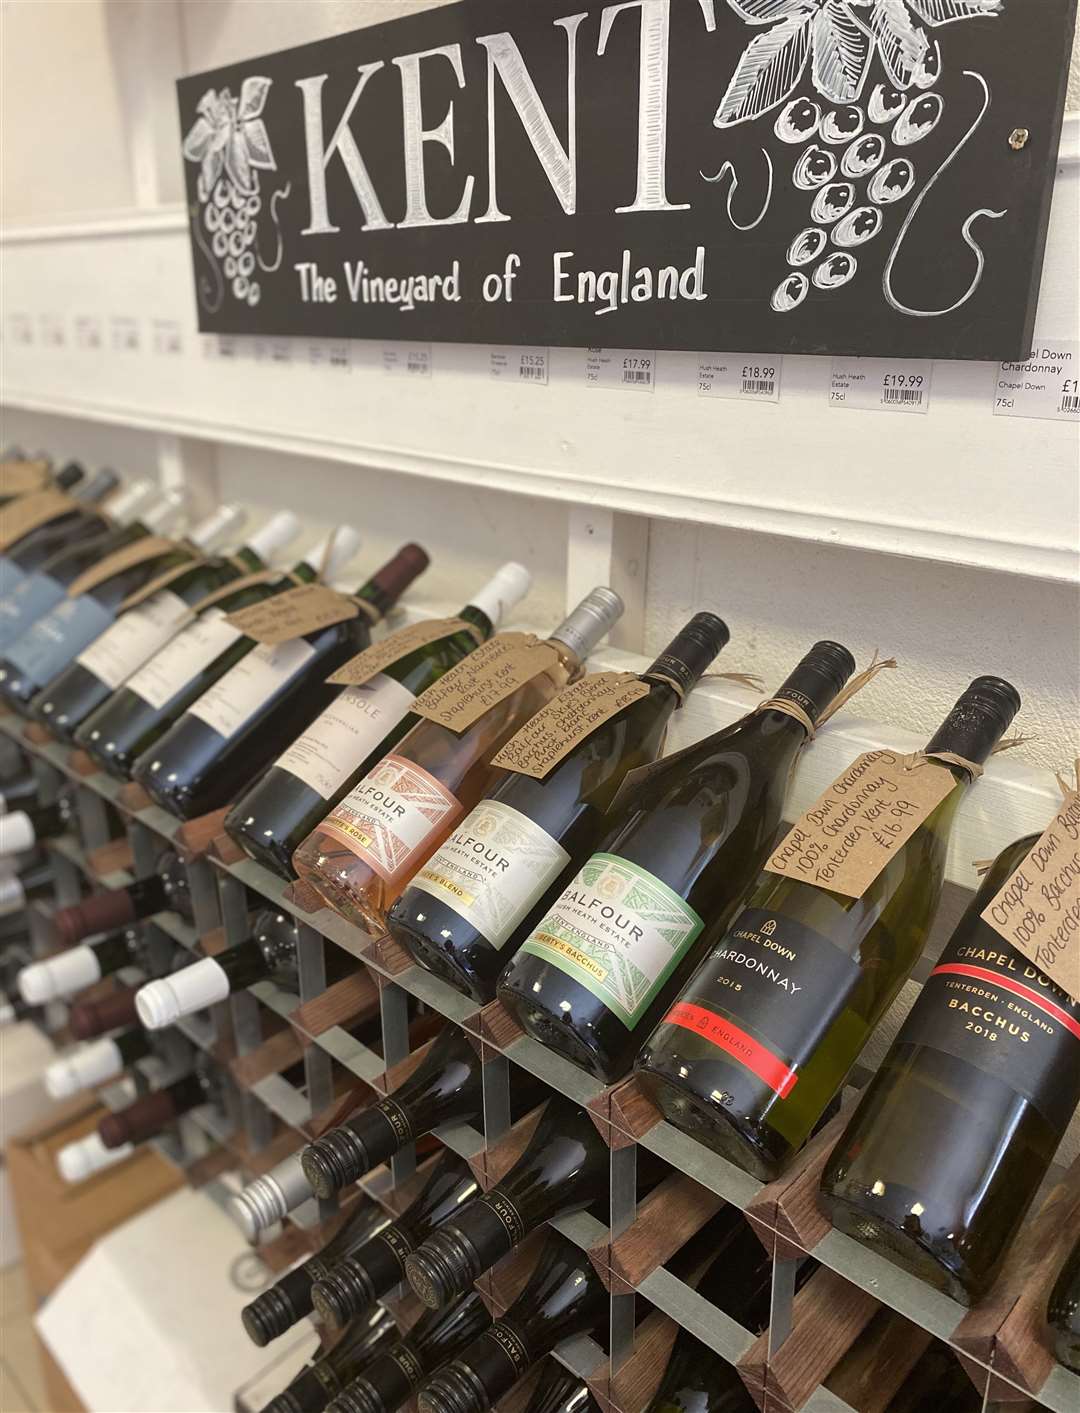 Celebrate English Wine Week with Kent wines from Chapel Down, Hush